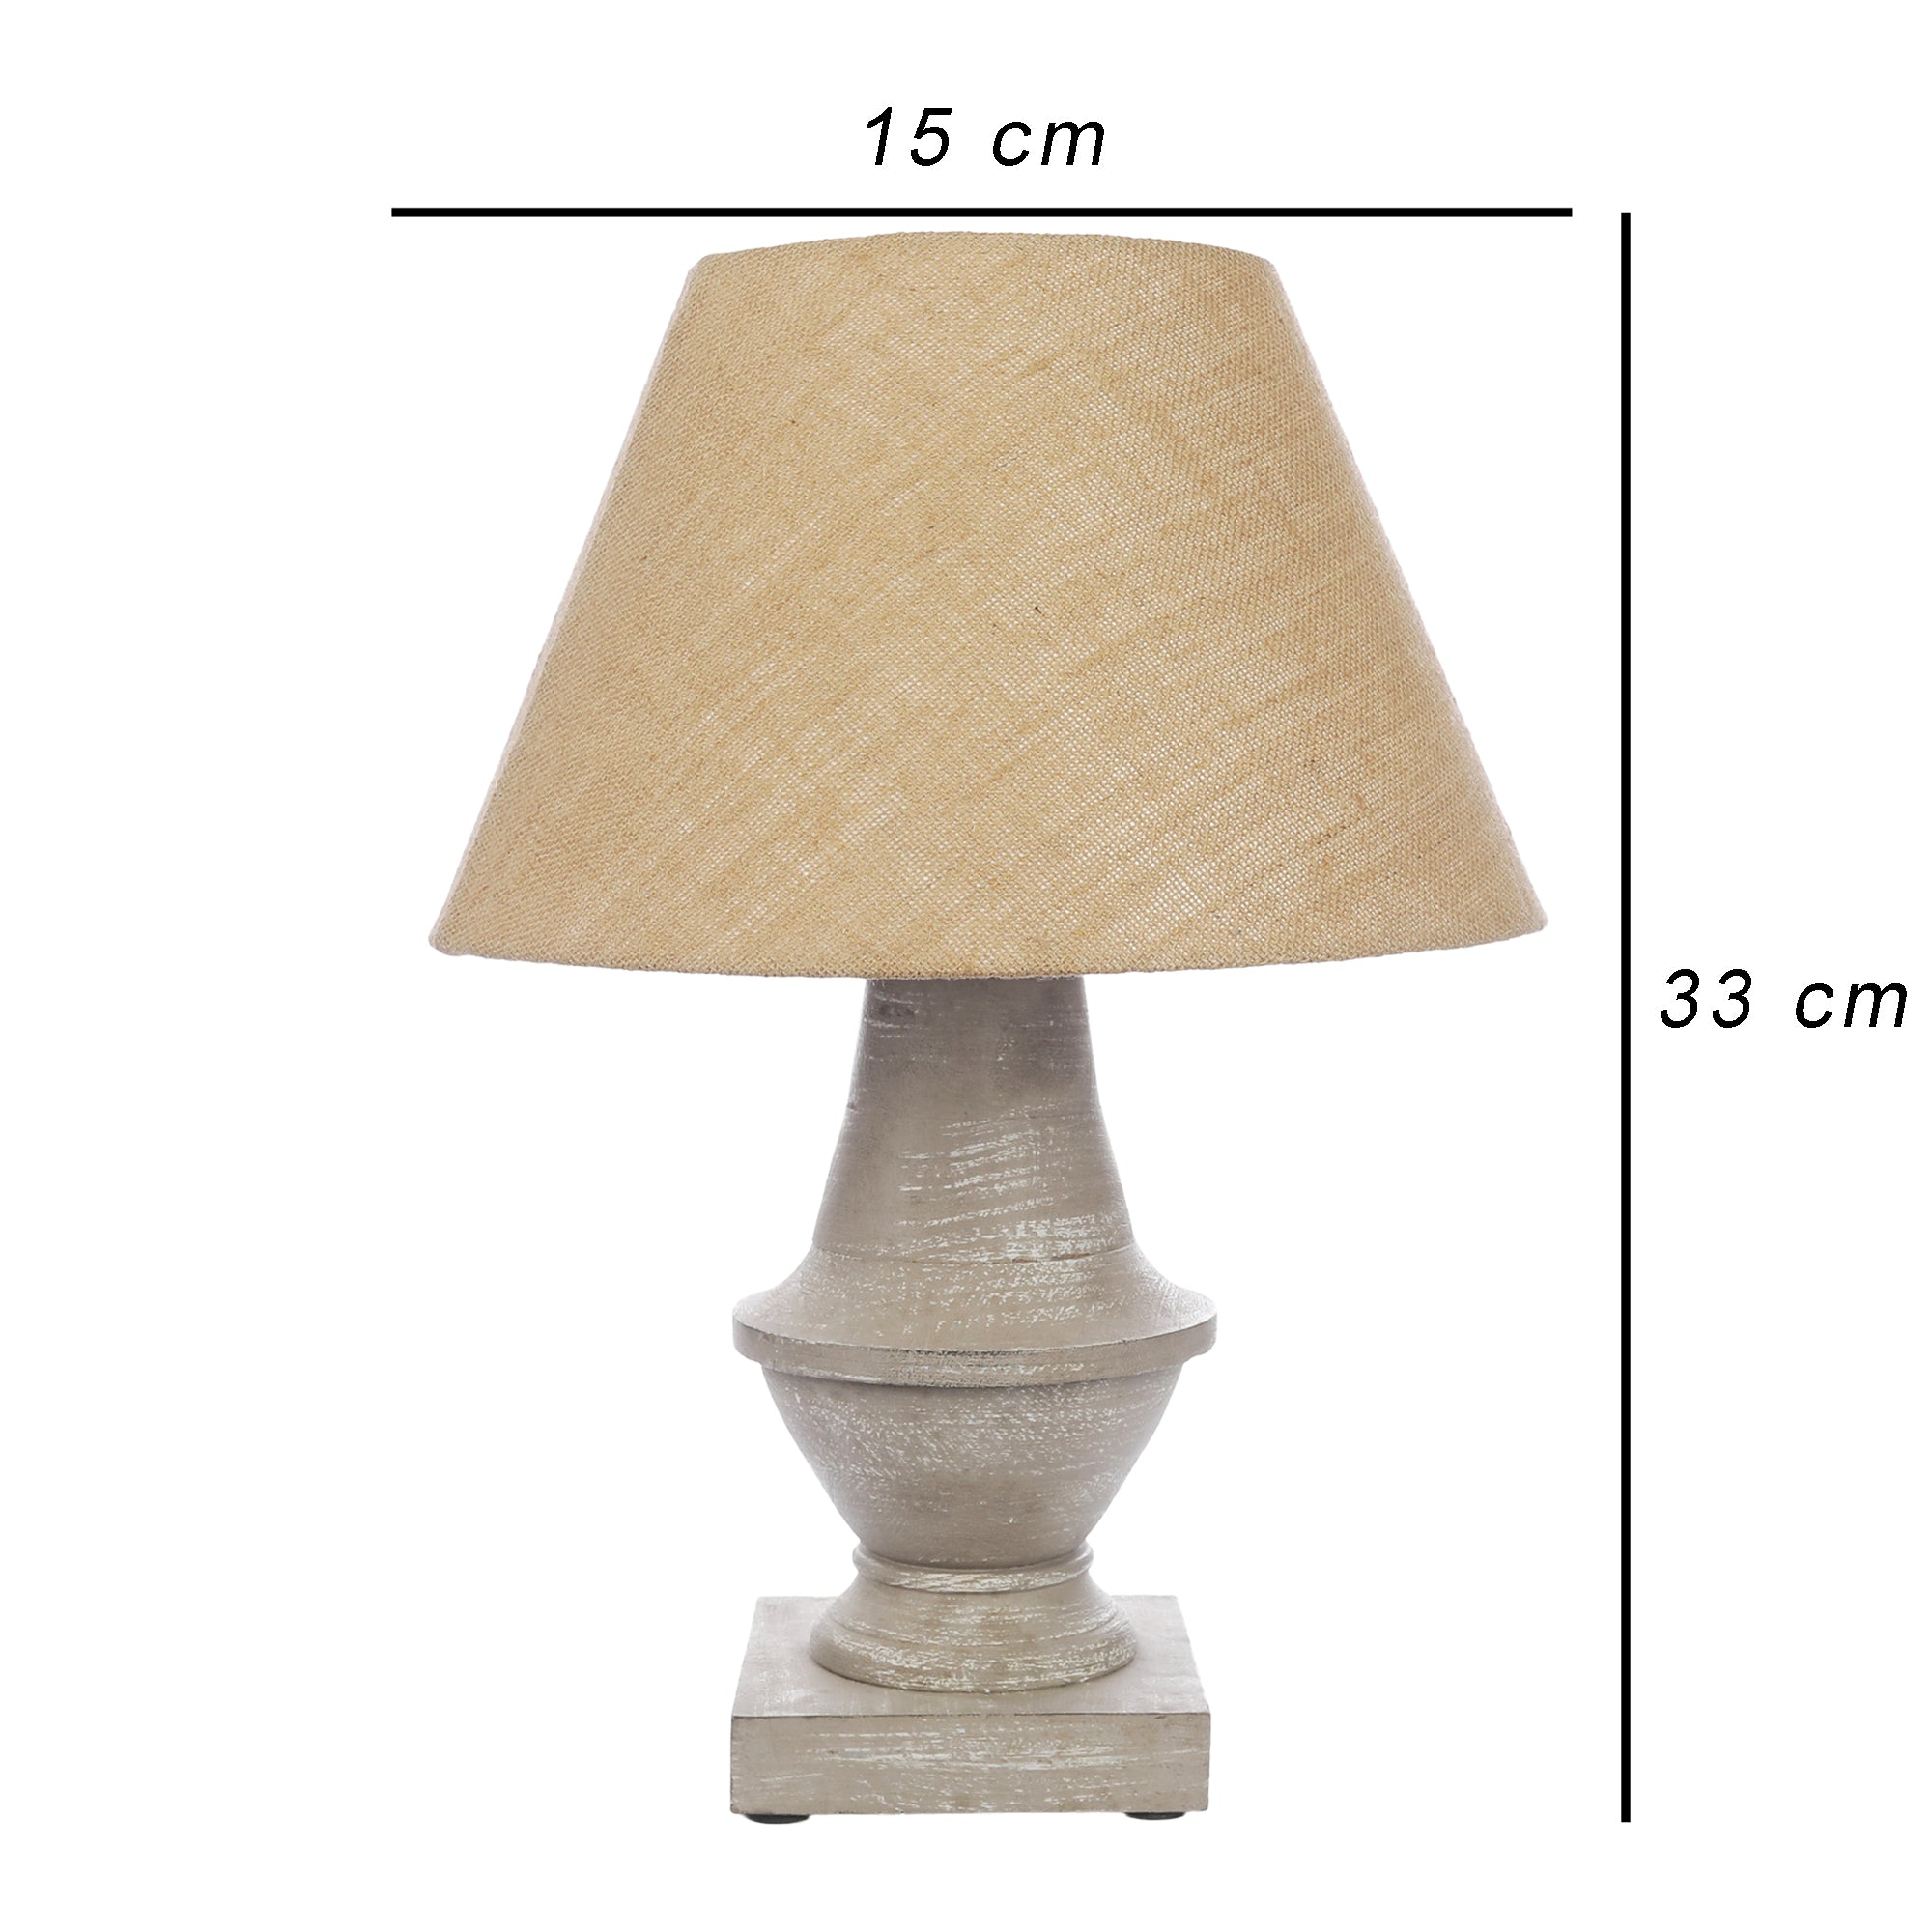 Hand Crafted Antique Table Lamp With Shade (Includes Bulb)